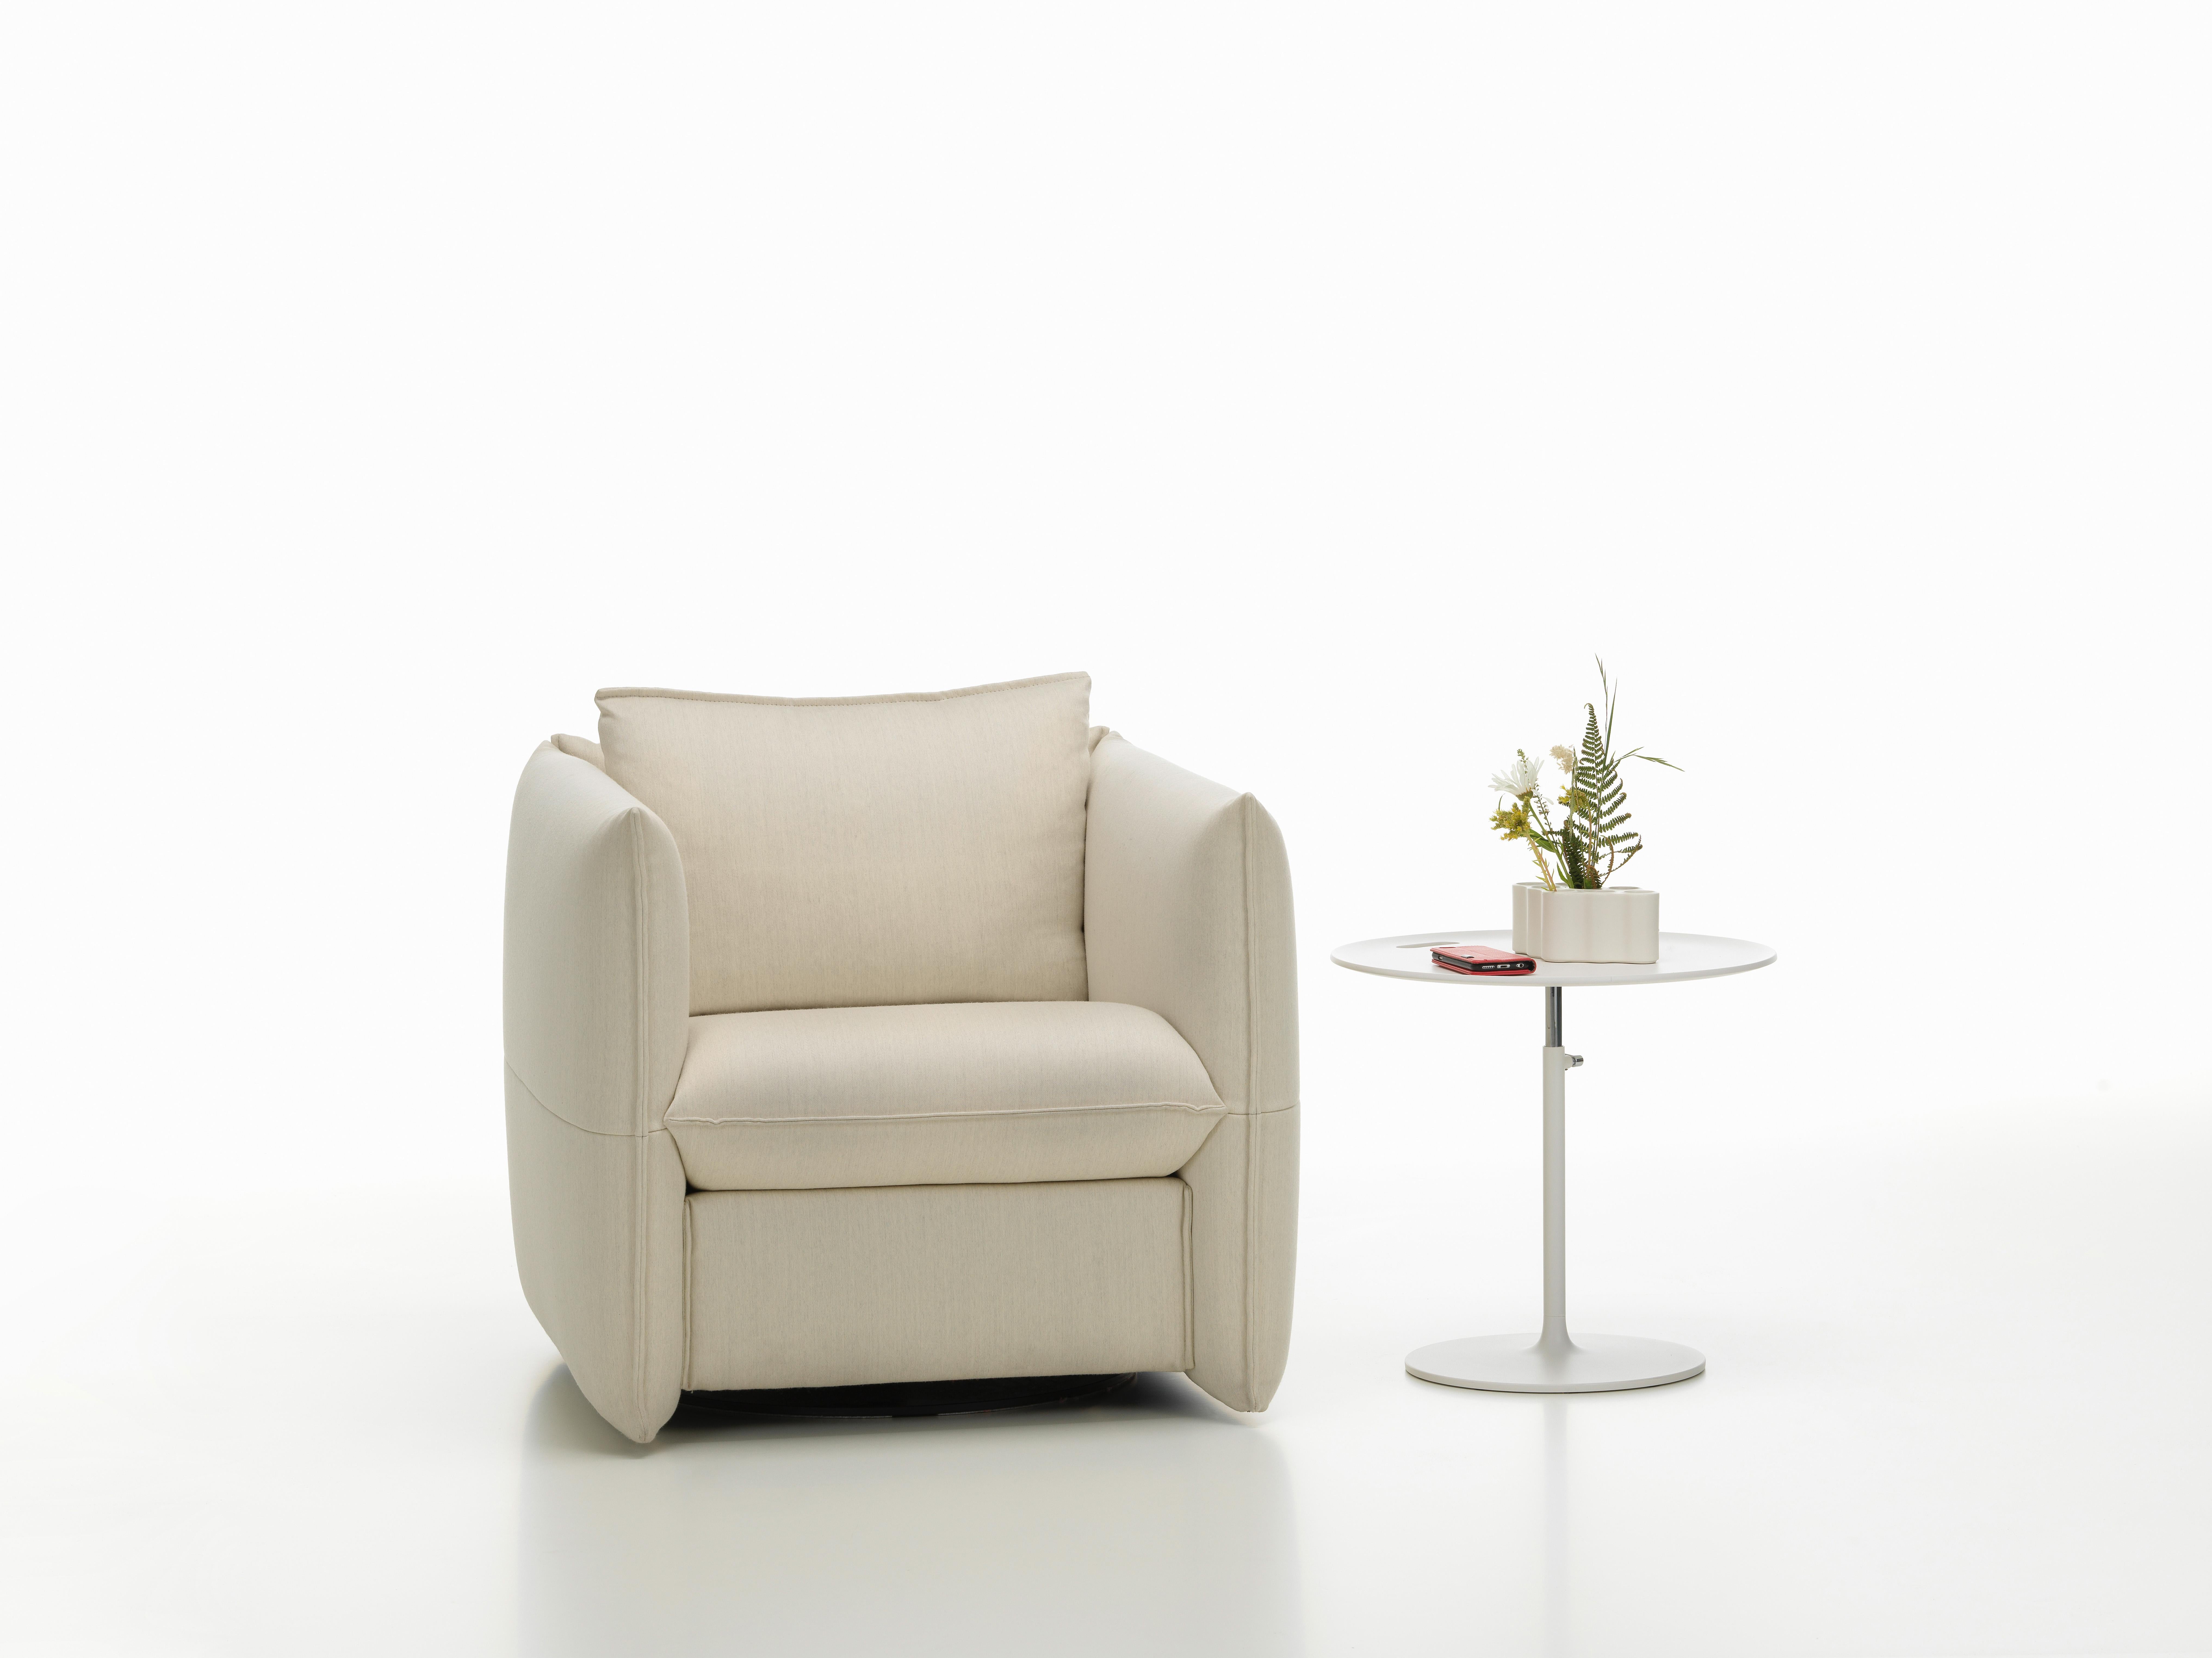 The Mariposa Club armchair is suitable for smaller urban living spaces and for lounge and hospitality settings. The slim line body of both the sofa and armchairs offers maximum seating comfort, while the compact dimensions take up limited space.